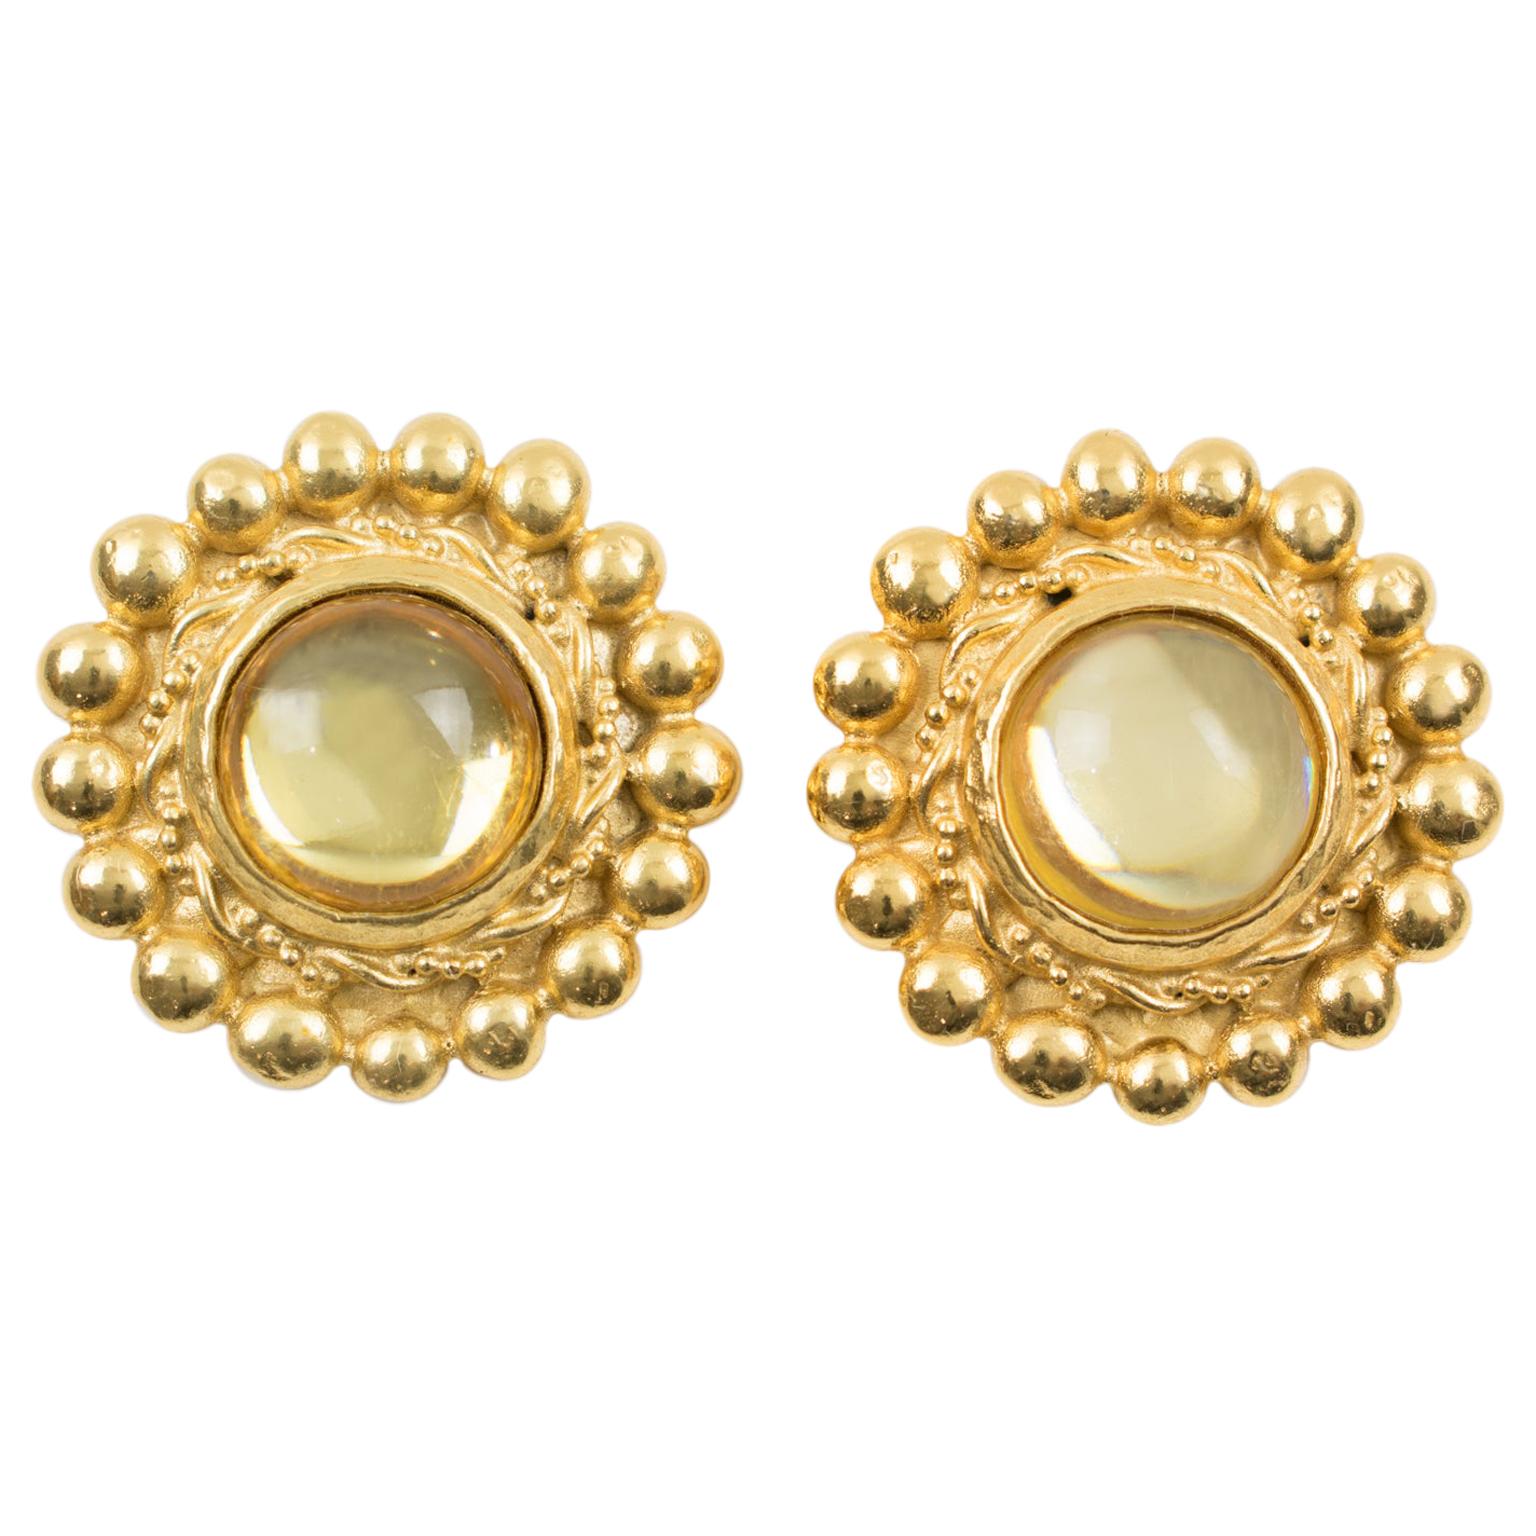 Sonia Rykiel Jeweled Clip Earrings with Yellow Resin Cabochons For Sale